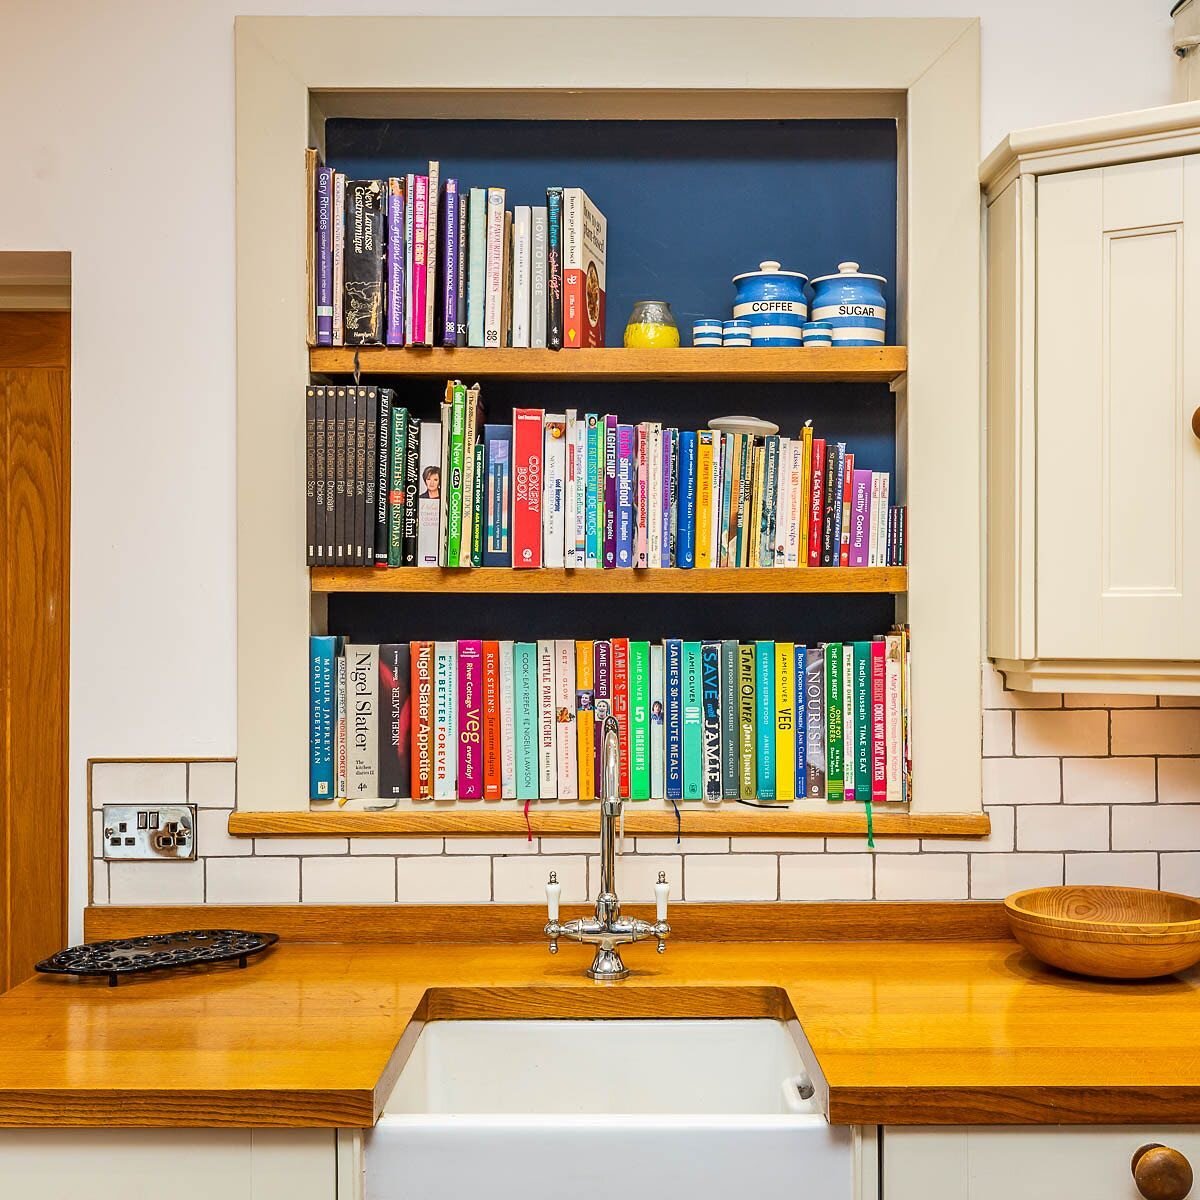 Where do you turn to for development, support and advice?
What books do you read &amp; what would you recommend?

#estateagent #estateagents #estateagentsofinstagram